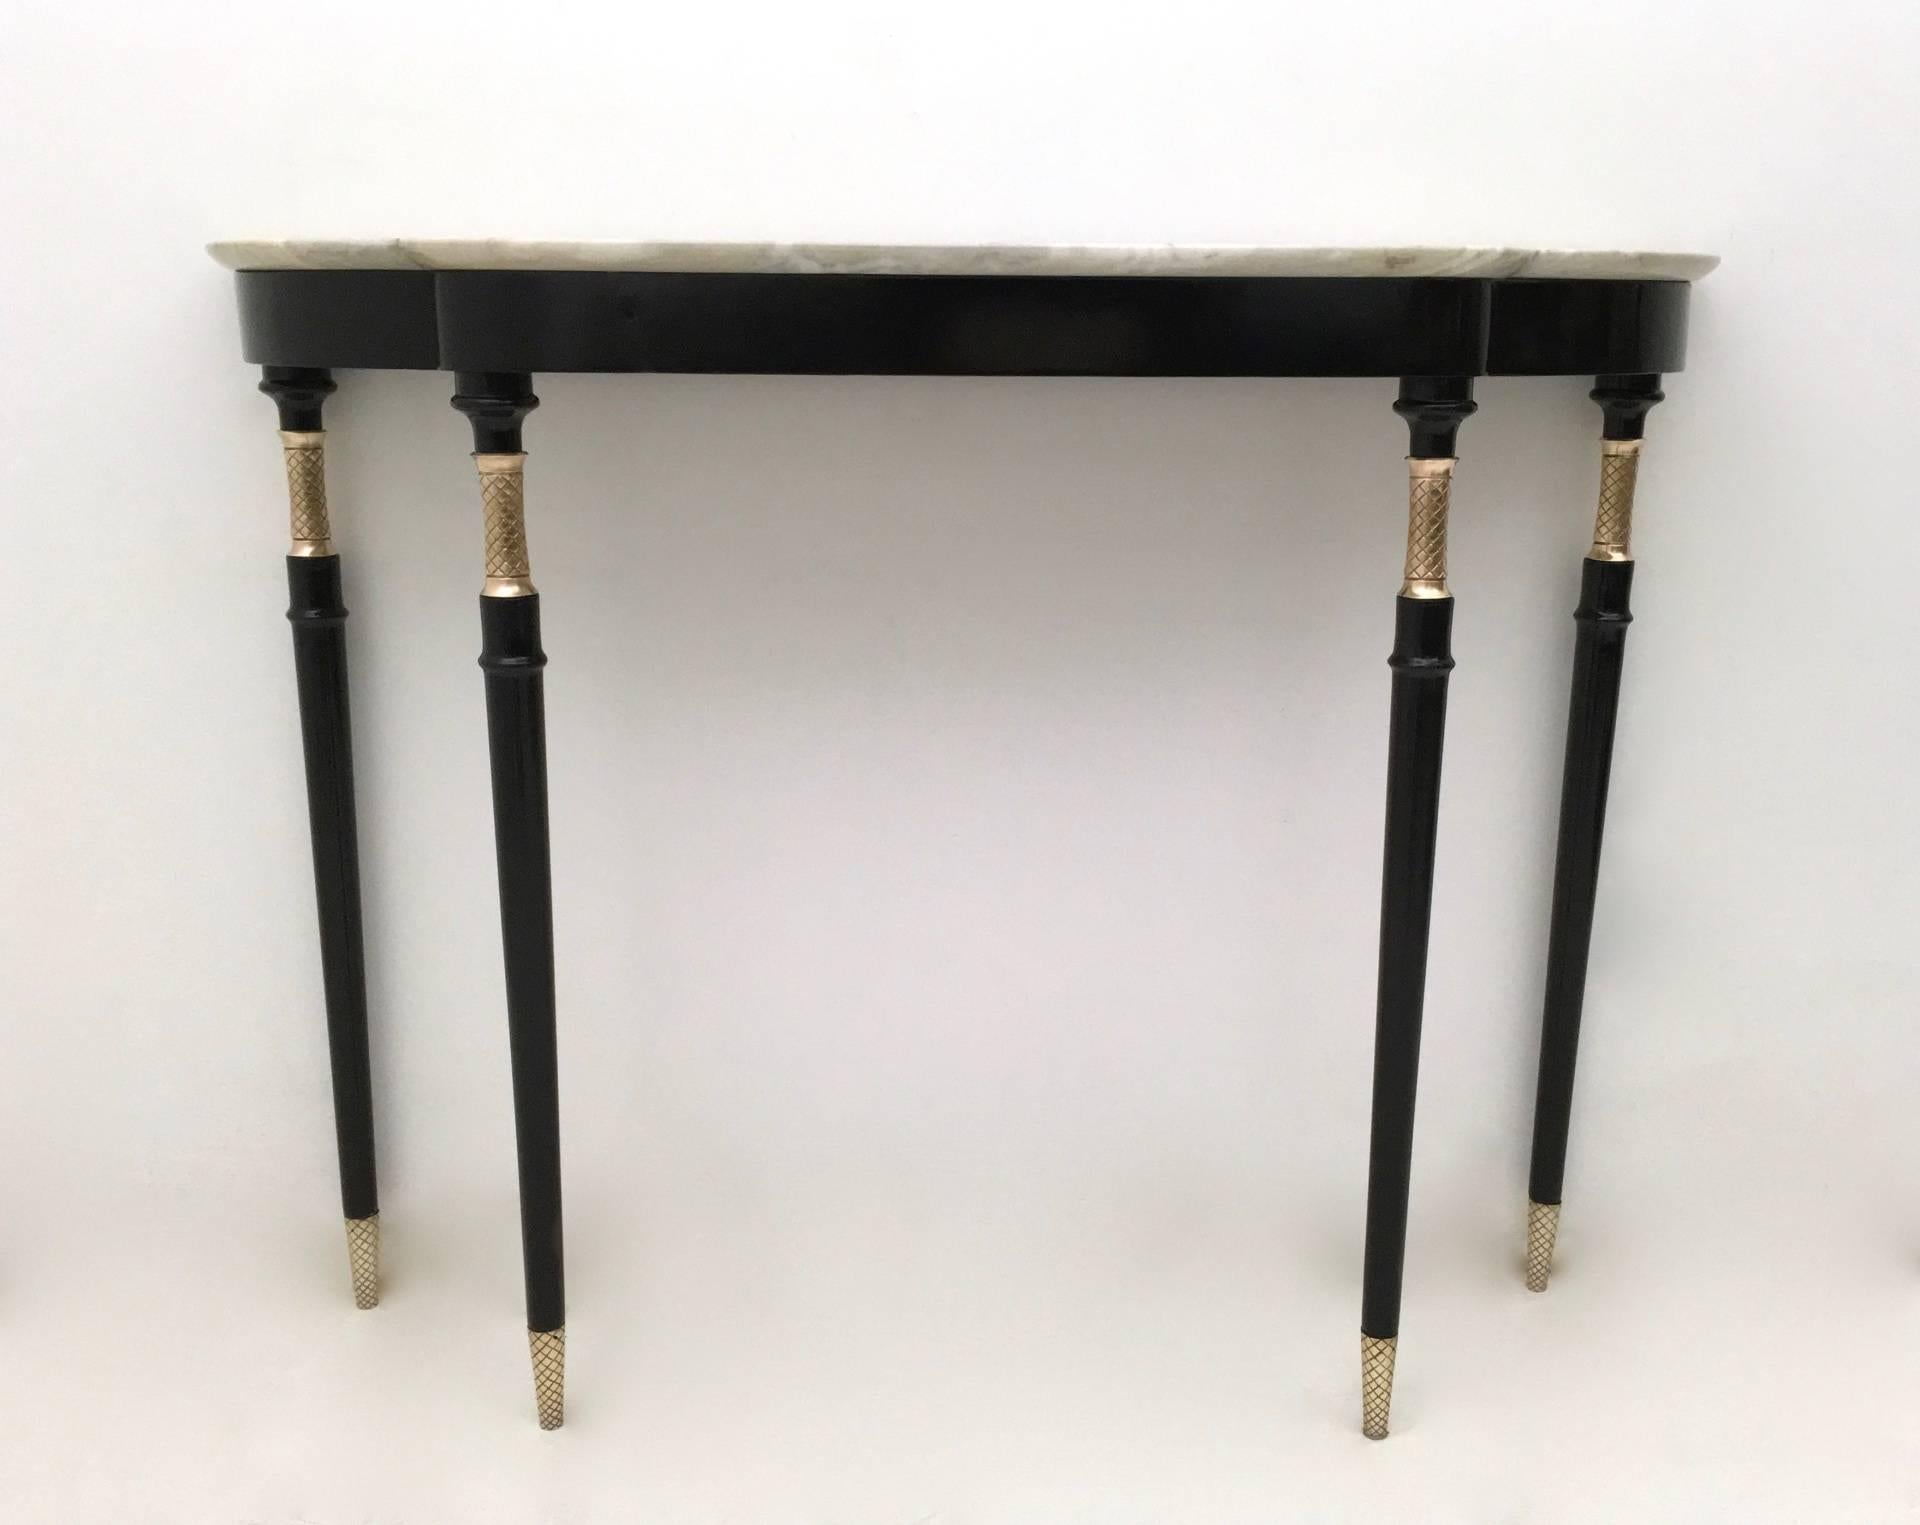 Made in lacquered wood. 
It features a white Carrara marble top and brass feet caps. 
In excellent original condition and ready to become a piece in a home. 

Width: 113 cm 
Depth: 31 cm
Height: 89 cm